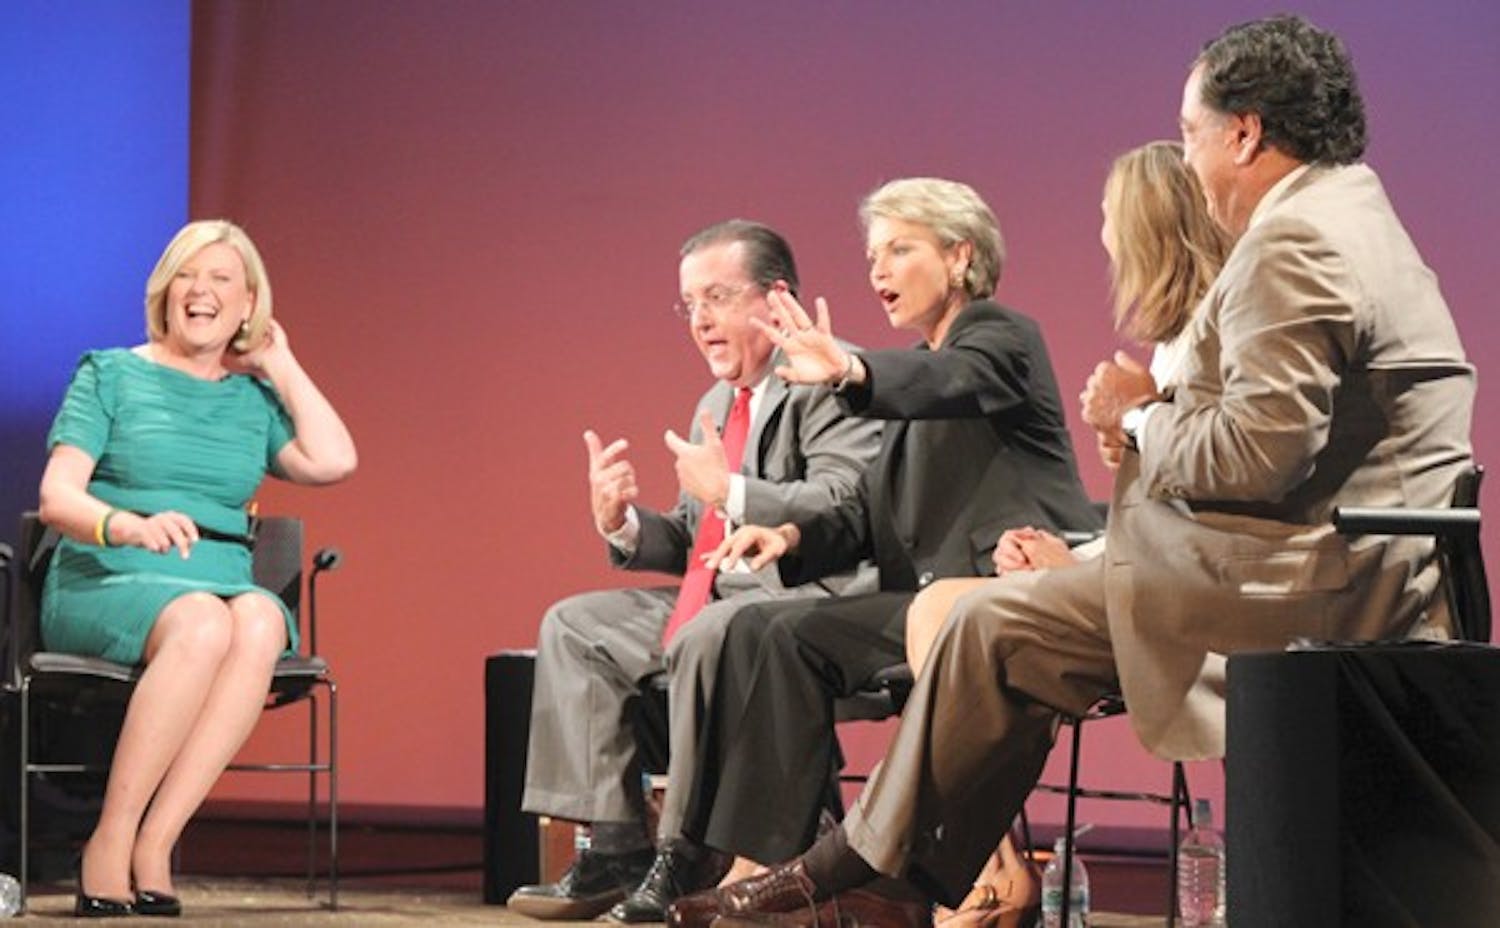 WATER TALK: NBC News' Anne Thompson moderates a discussion Thursday night at the Discovery Town Hall event at the Galvin Playhouse between (from left to right) Sustainability Scholar, Grady Gammage Junior, General Manager of Nevada Water Authority, Patricia Mulroy, Director of Communications for Climate Central, Dr. Heidi M. Cullen, and former Governor of New Mexico Bill Richardson as they examine how shifting climate patterns are stressing our freshwater resources and how we can develop better, more sustainable water practices. (Photo by Rosie Gochnour)